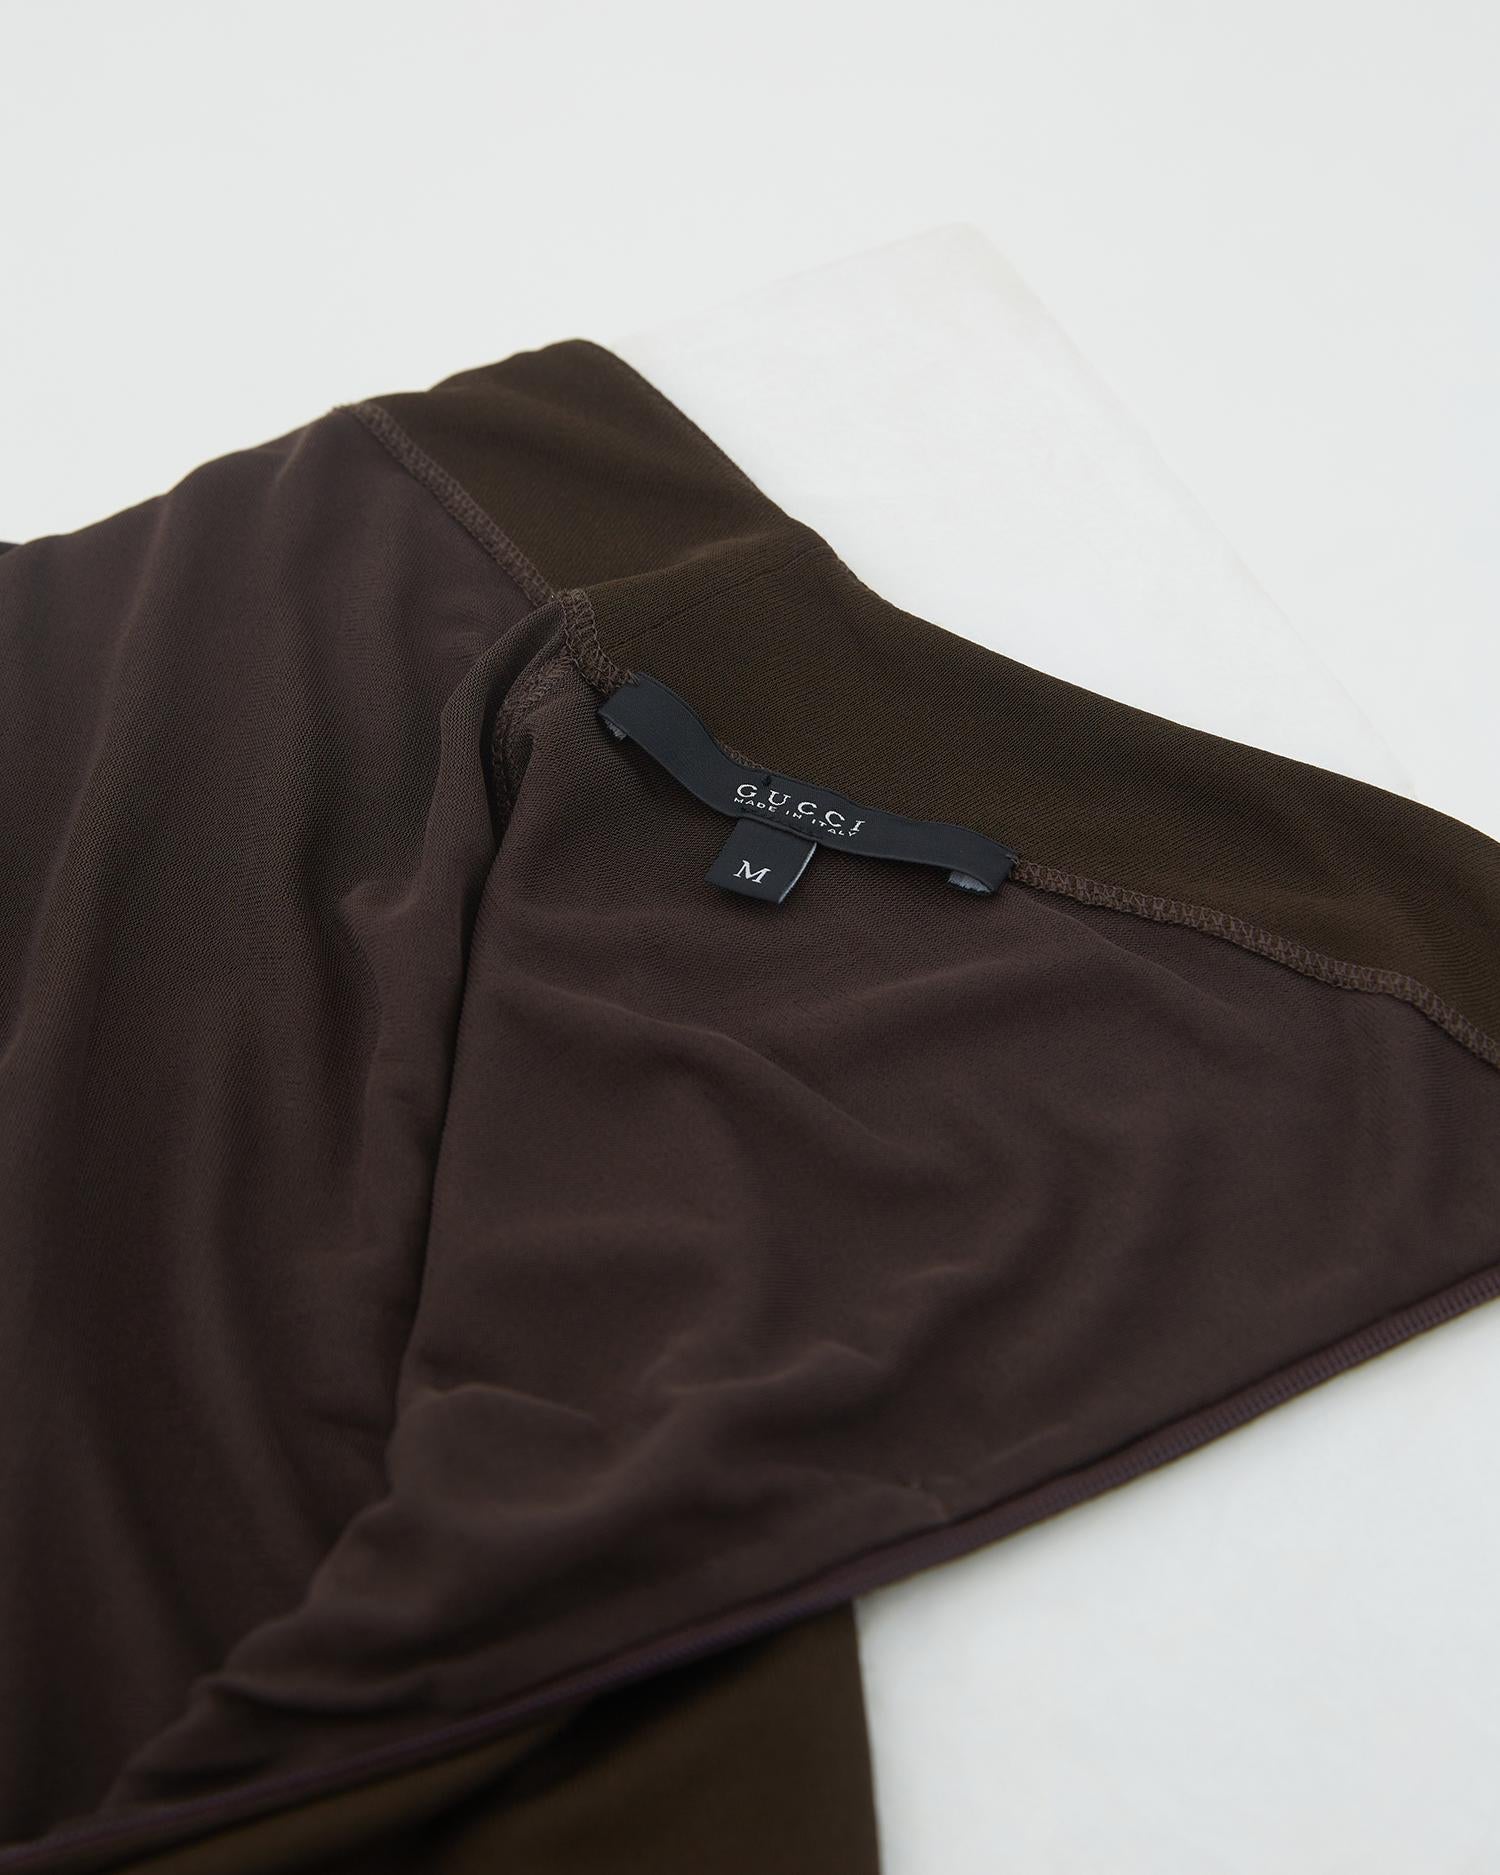 Women's Gucci S/S 2006 Chocolate brown backless halter bamboo cocktail dress For Sale